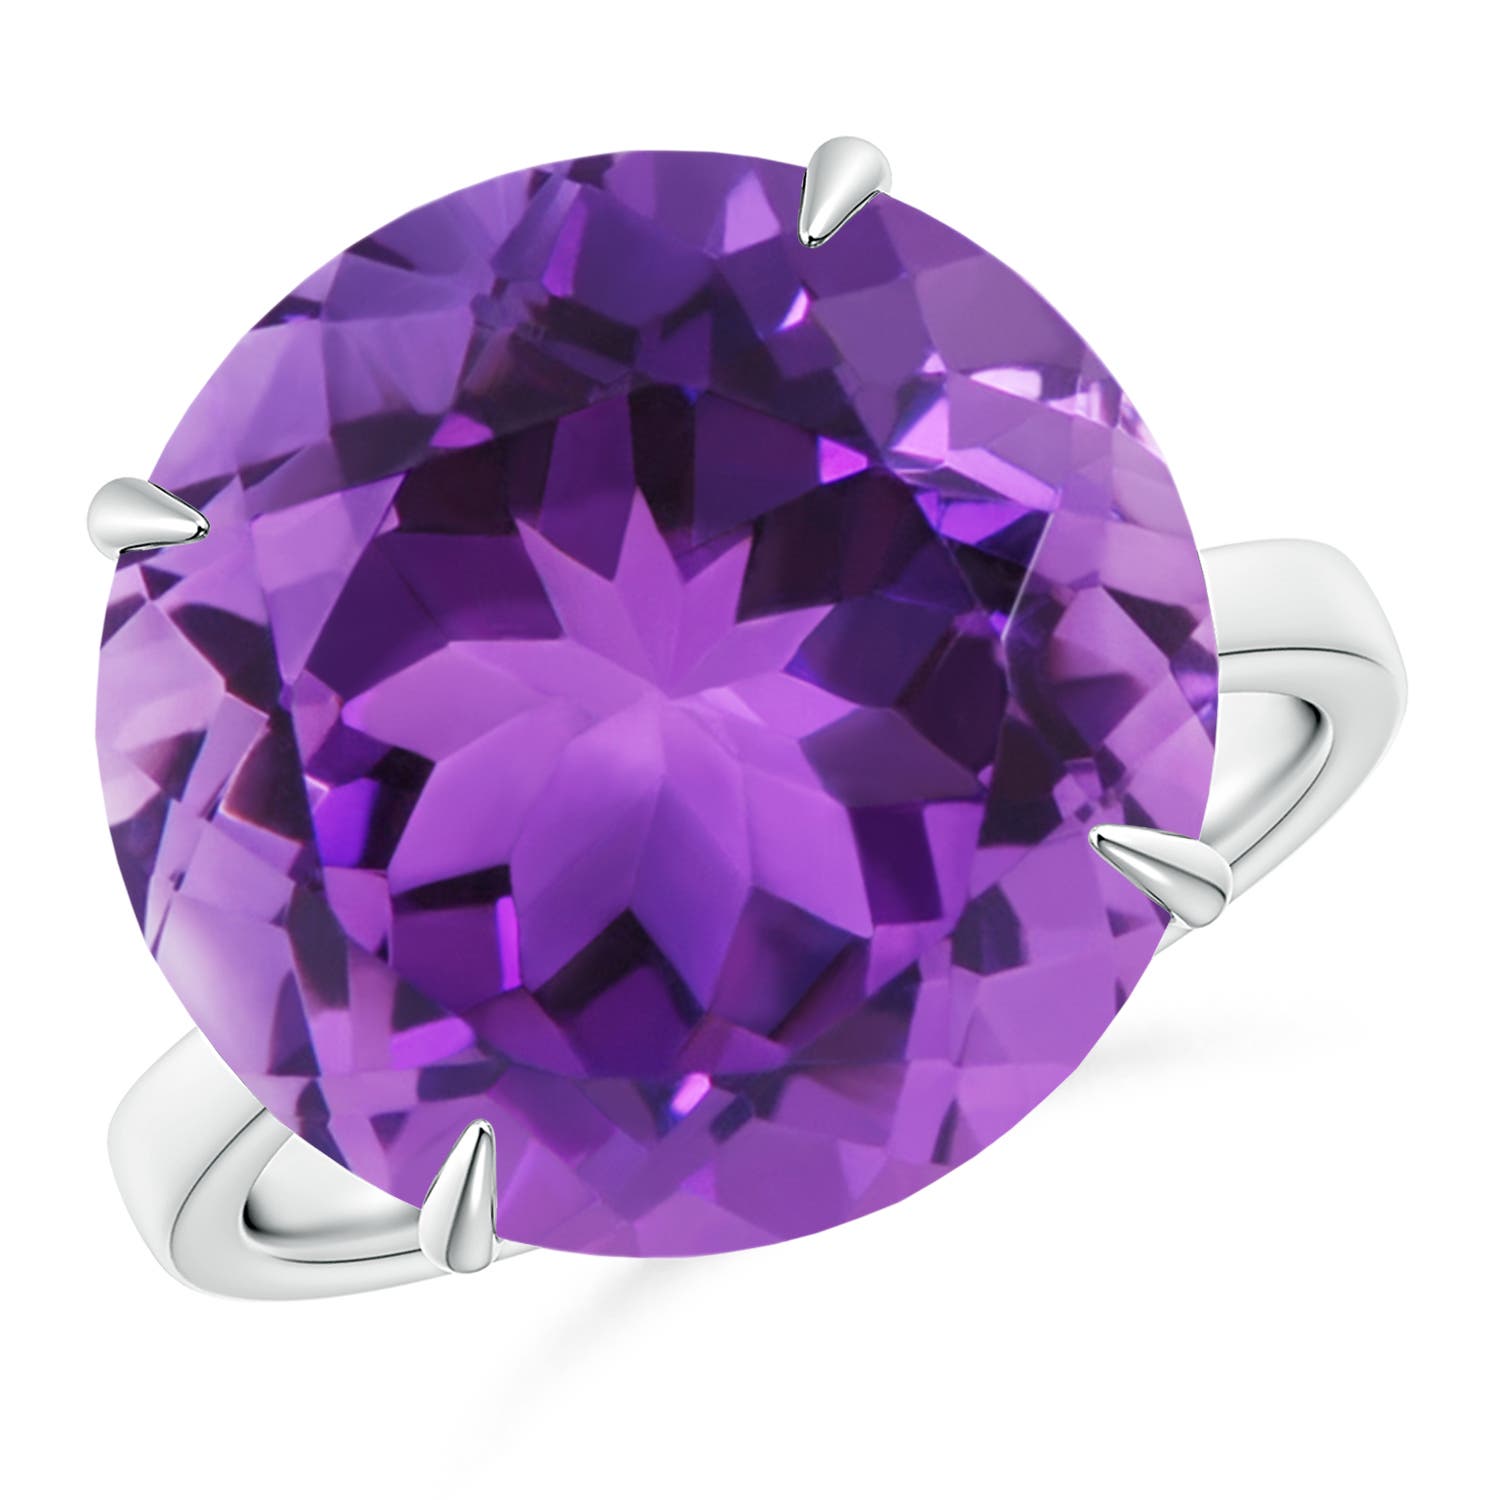 AAA- Amethyst / 11 CT / 14 KT White Gold